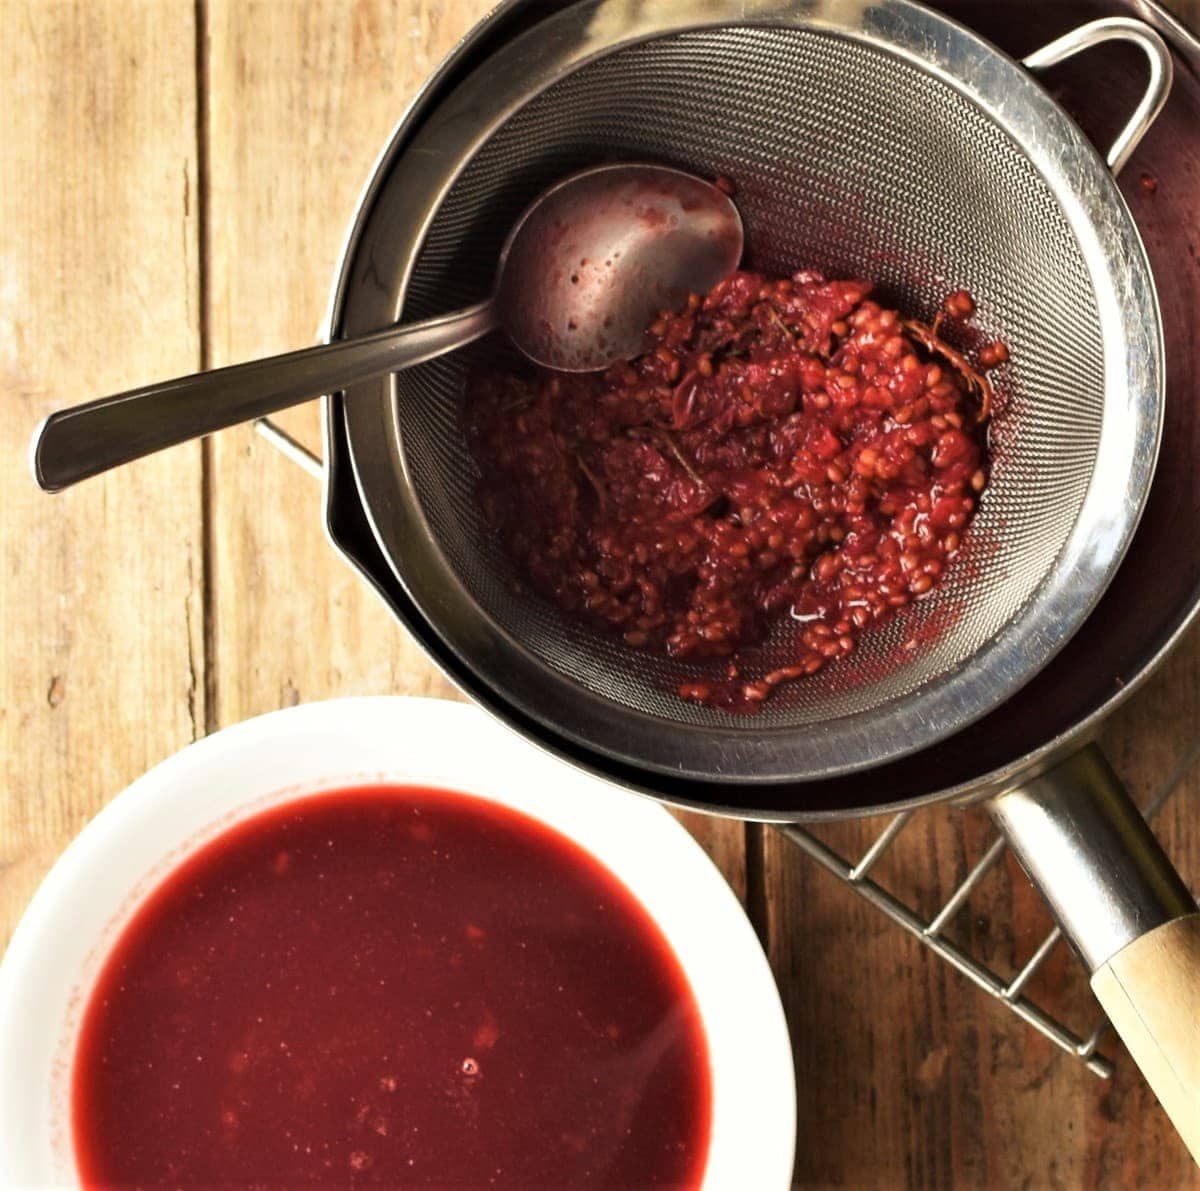 Redcurrant sauce and redcurrant pulp in sieve.